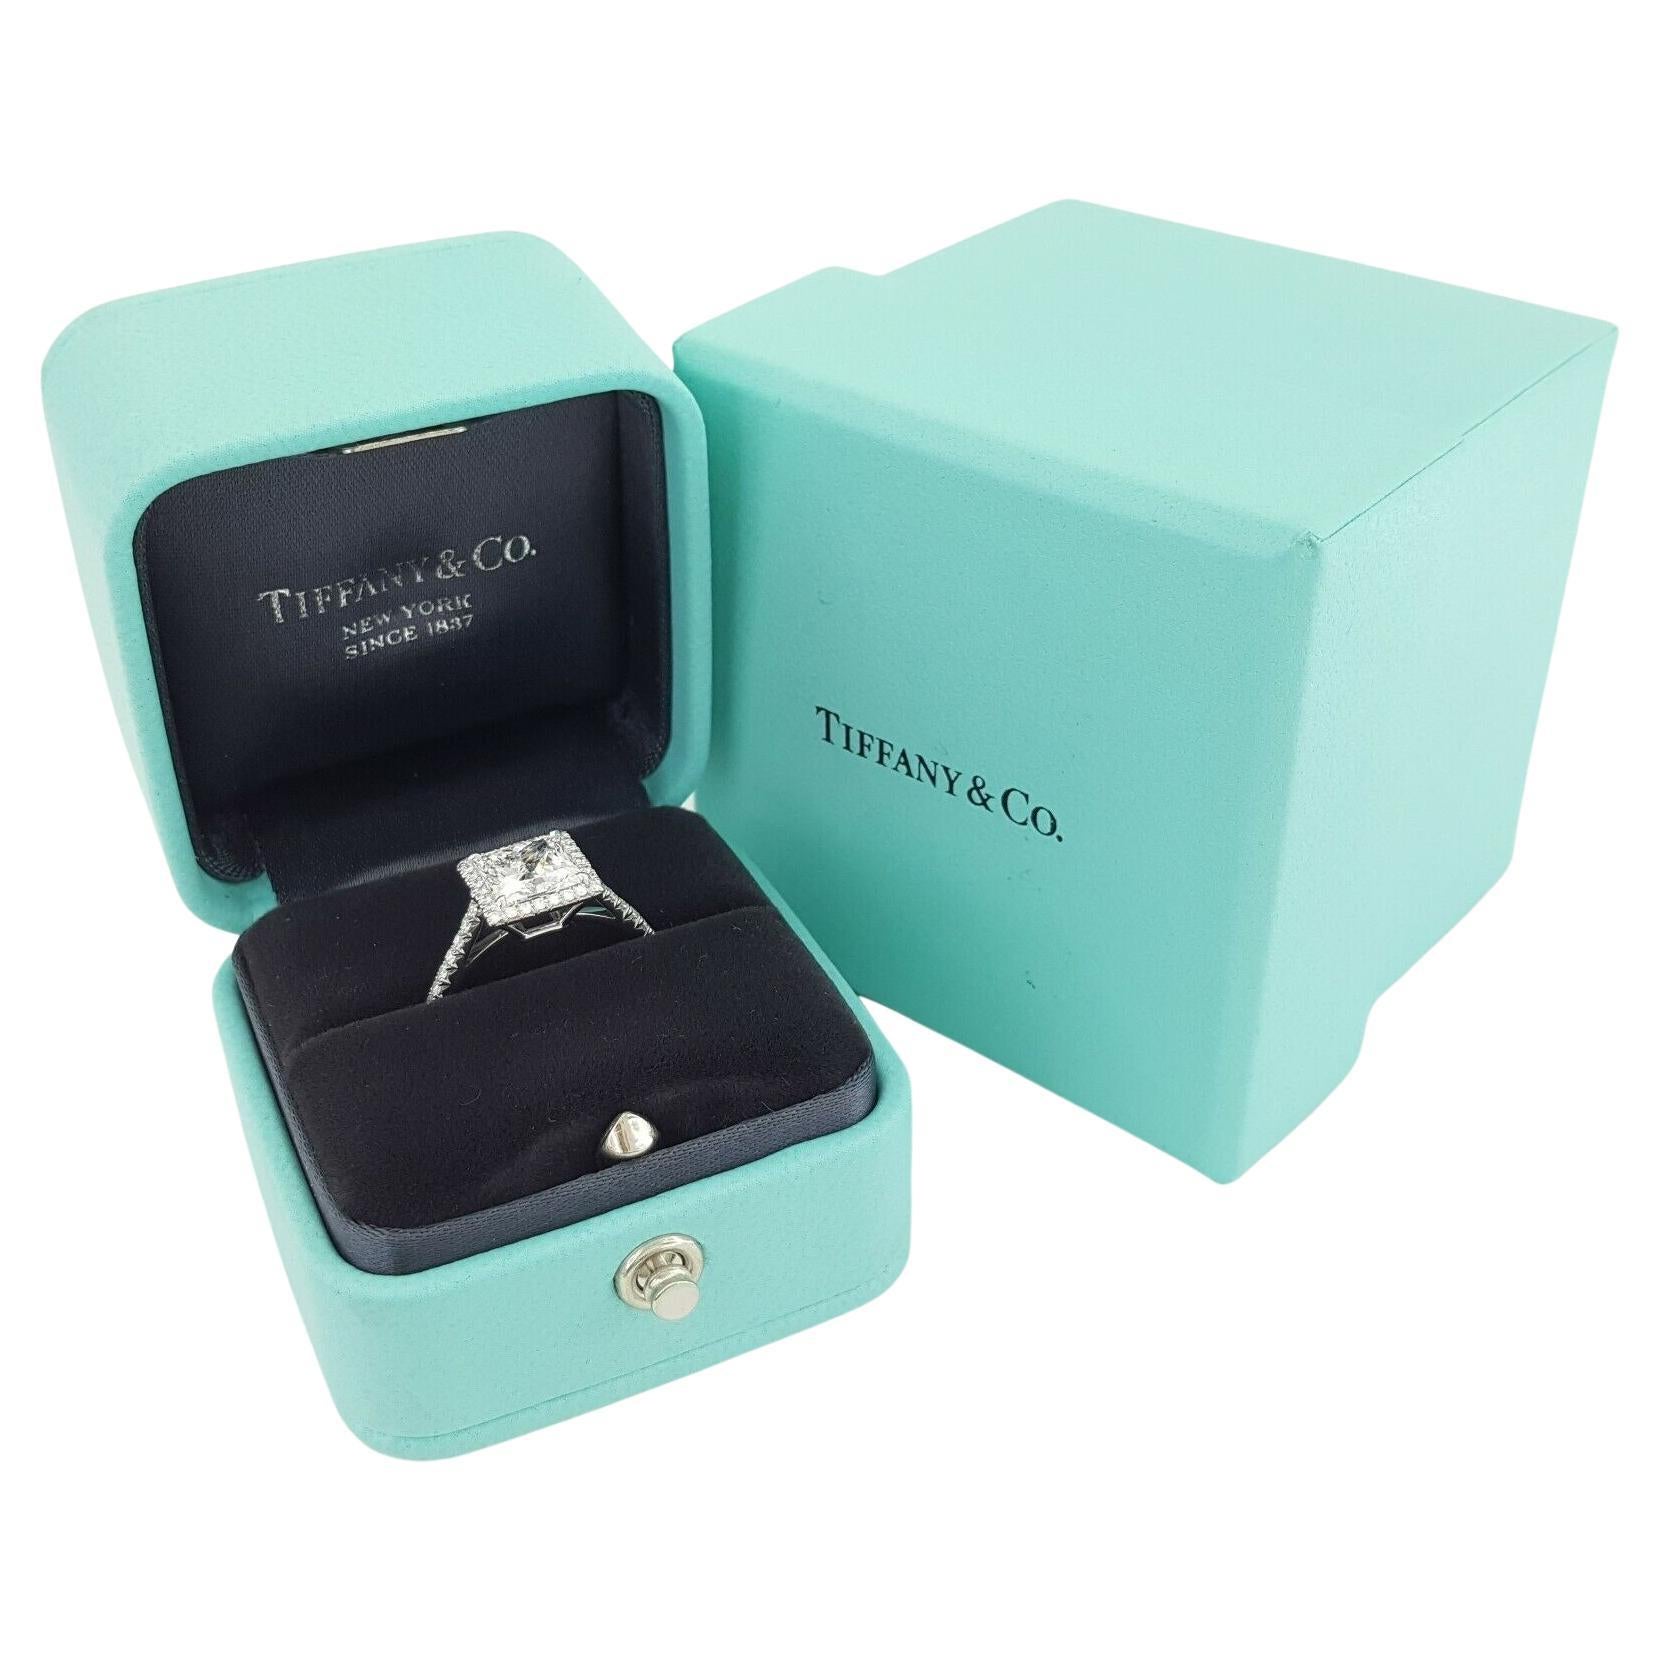 An exquisite Tiffany Soleste engagement ring. 

With a halo of brilliant bead-set diamonds and a stunning princess-cut center stone, light is gathered and mirrored throughout the design, resulting in an unrivaled display of brilliance. 

The center